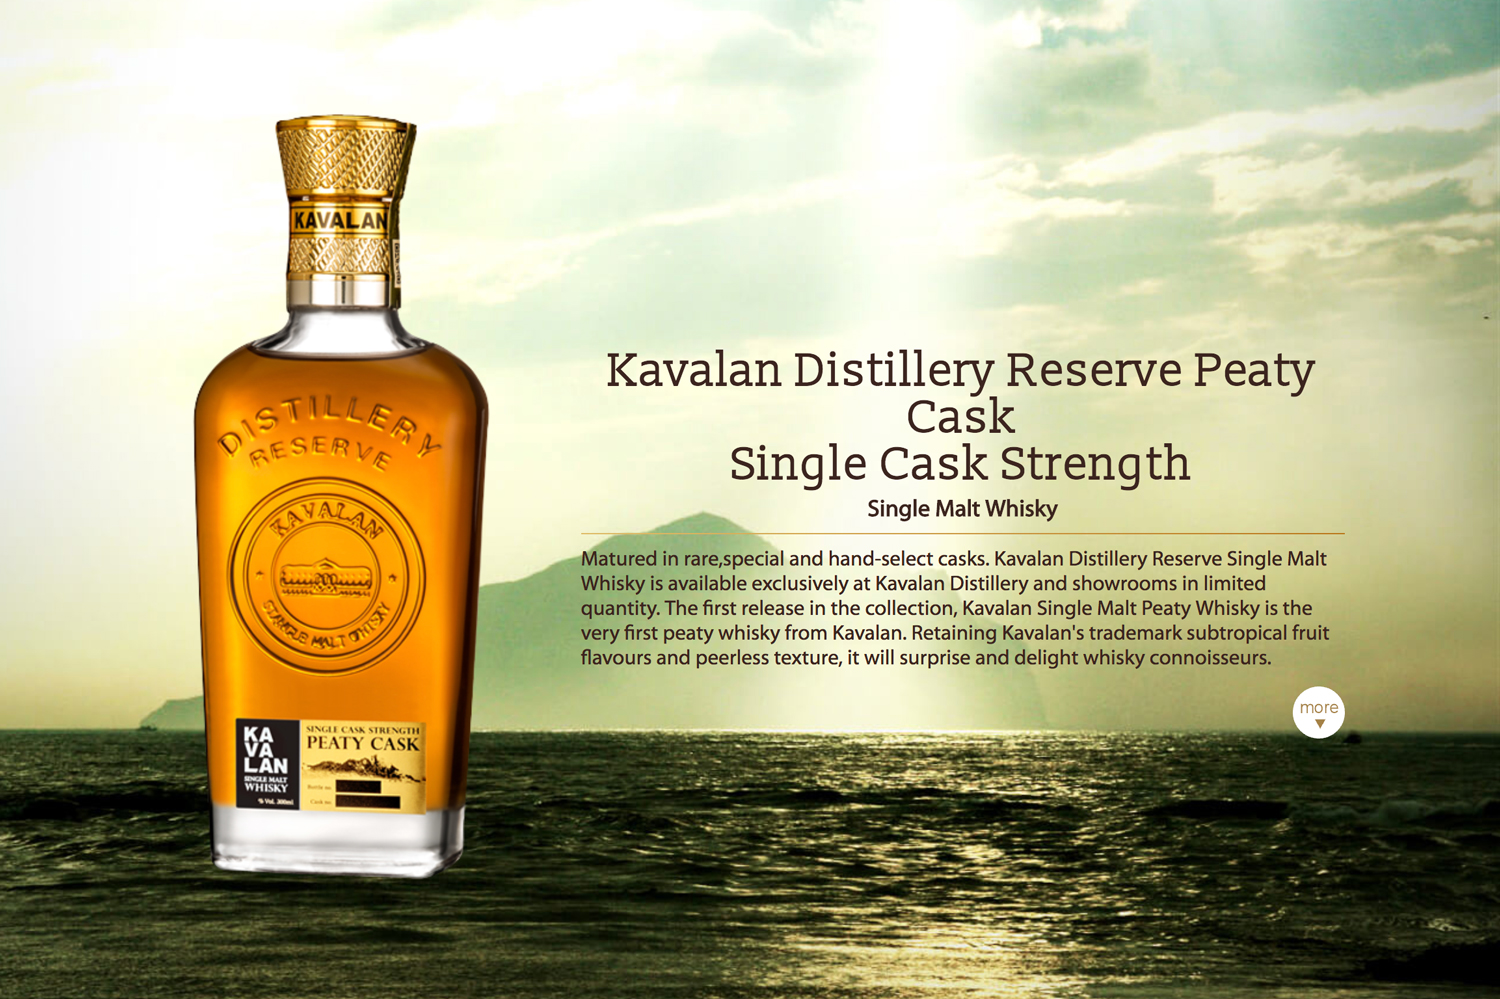 The Kavalan Distillery Reserve Peaty Cask was the Gold medal winners this year.